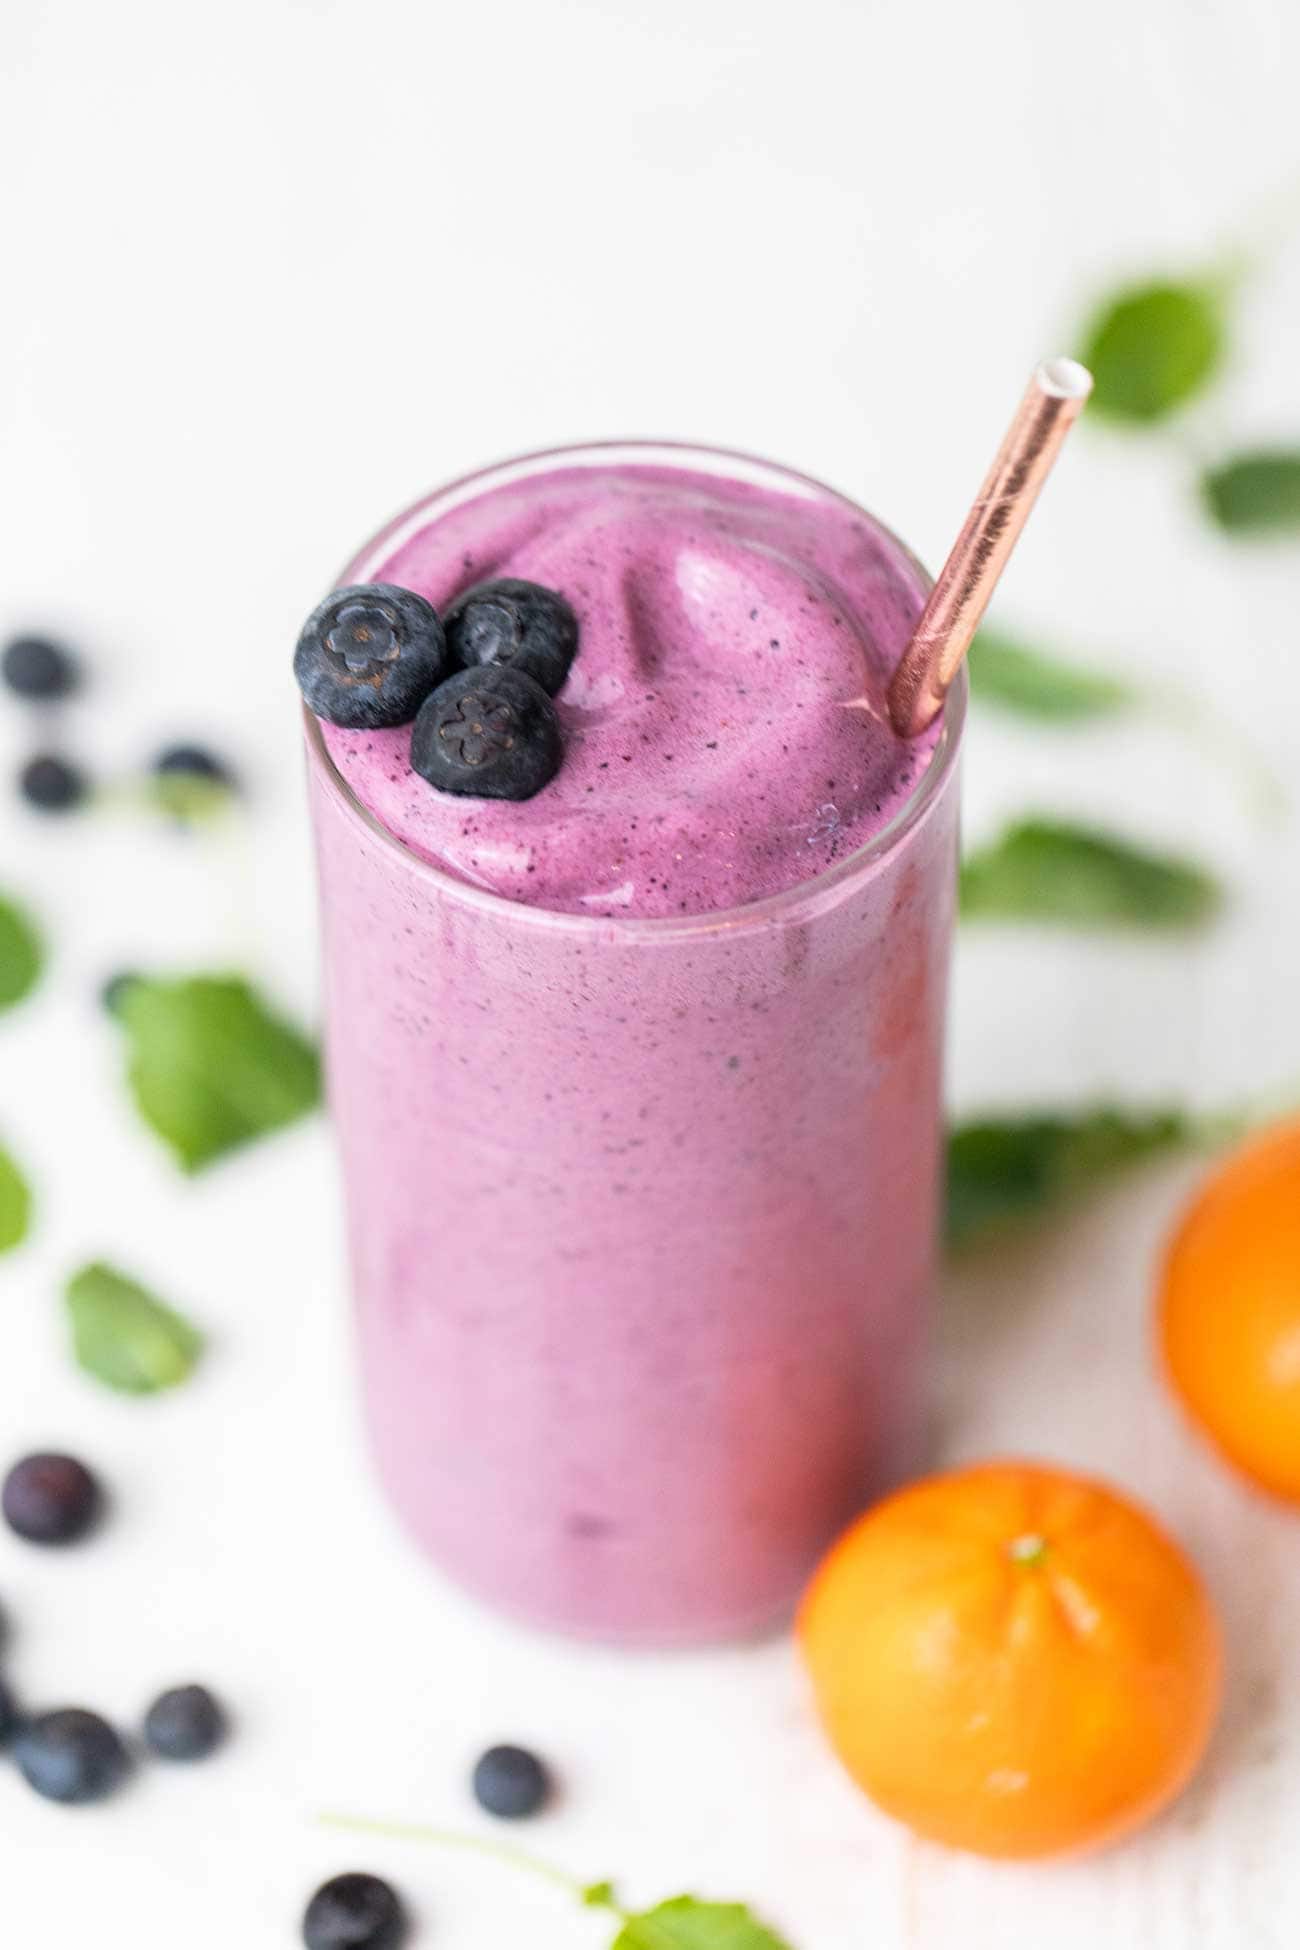 A thick and creamy smoothie made with cottage cheese and blueberries shown in a glass with a gold straw.